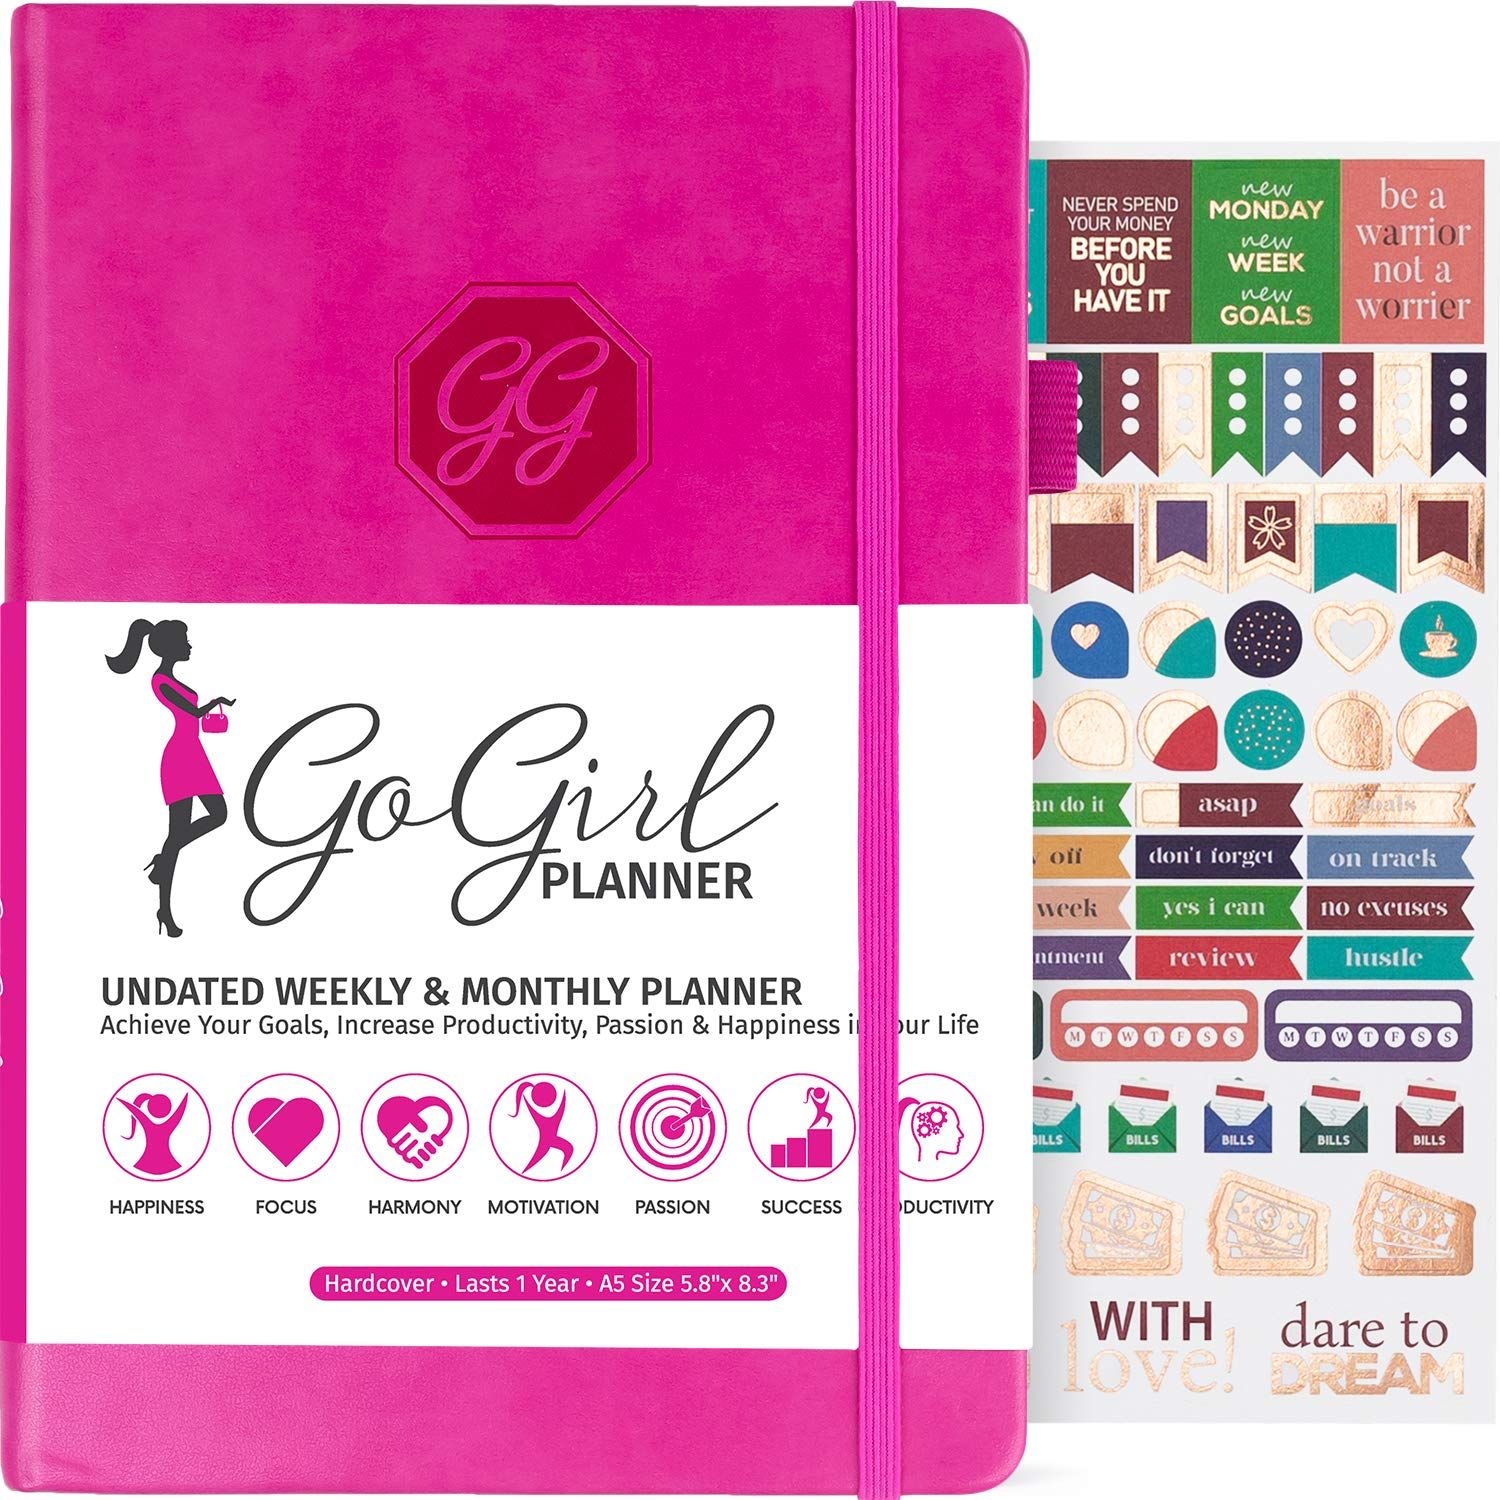 GoGirl Planner and Organizer for Women – A5 Size Weekly Planner, Goals Journal & Agenda to Improve T | Amazon (US)